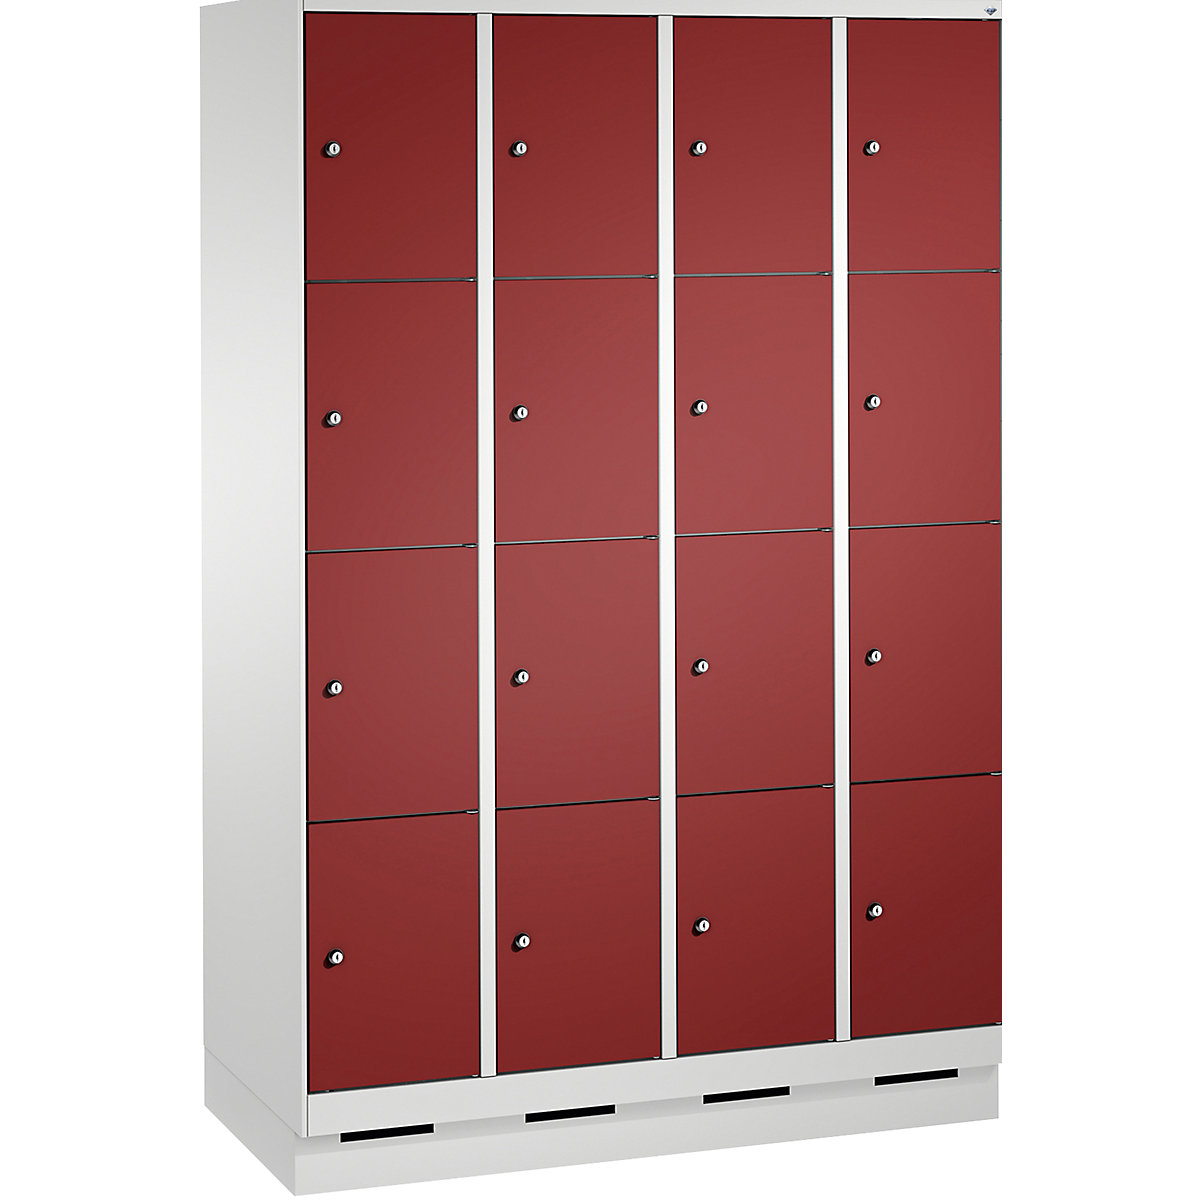 EVOLO locker unit, with plinth – C+P, 4 compartments, 4 shelf compartments each, compartment width 300 mm, light grey / ruby red